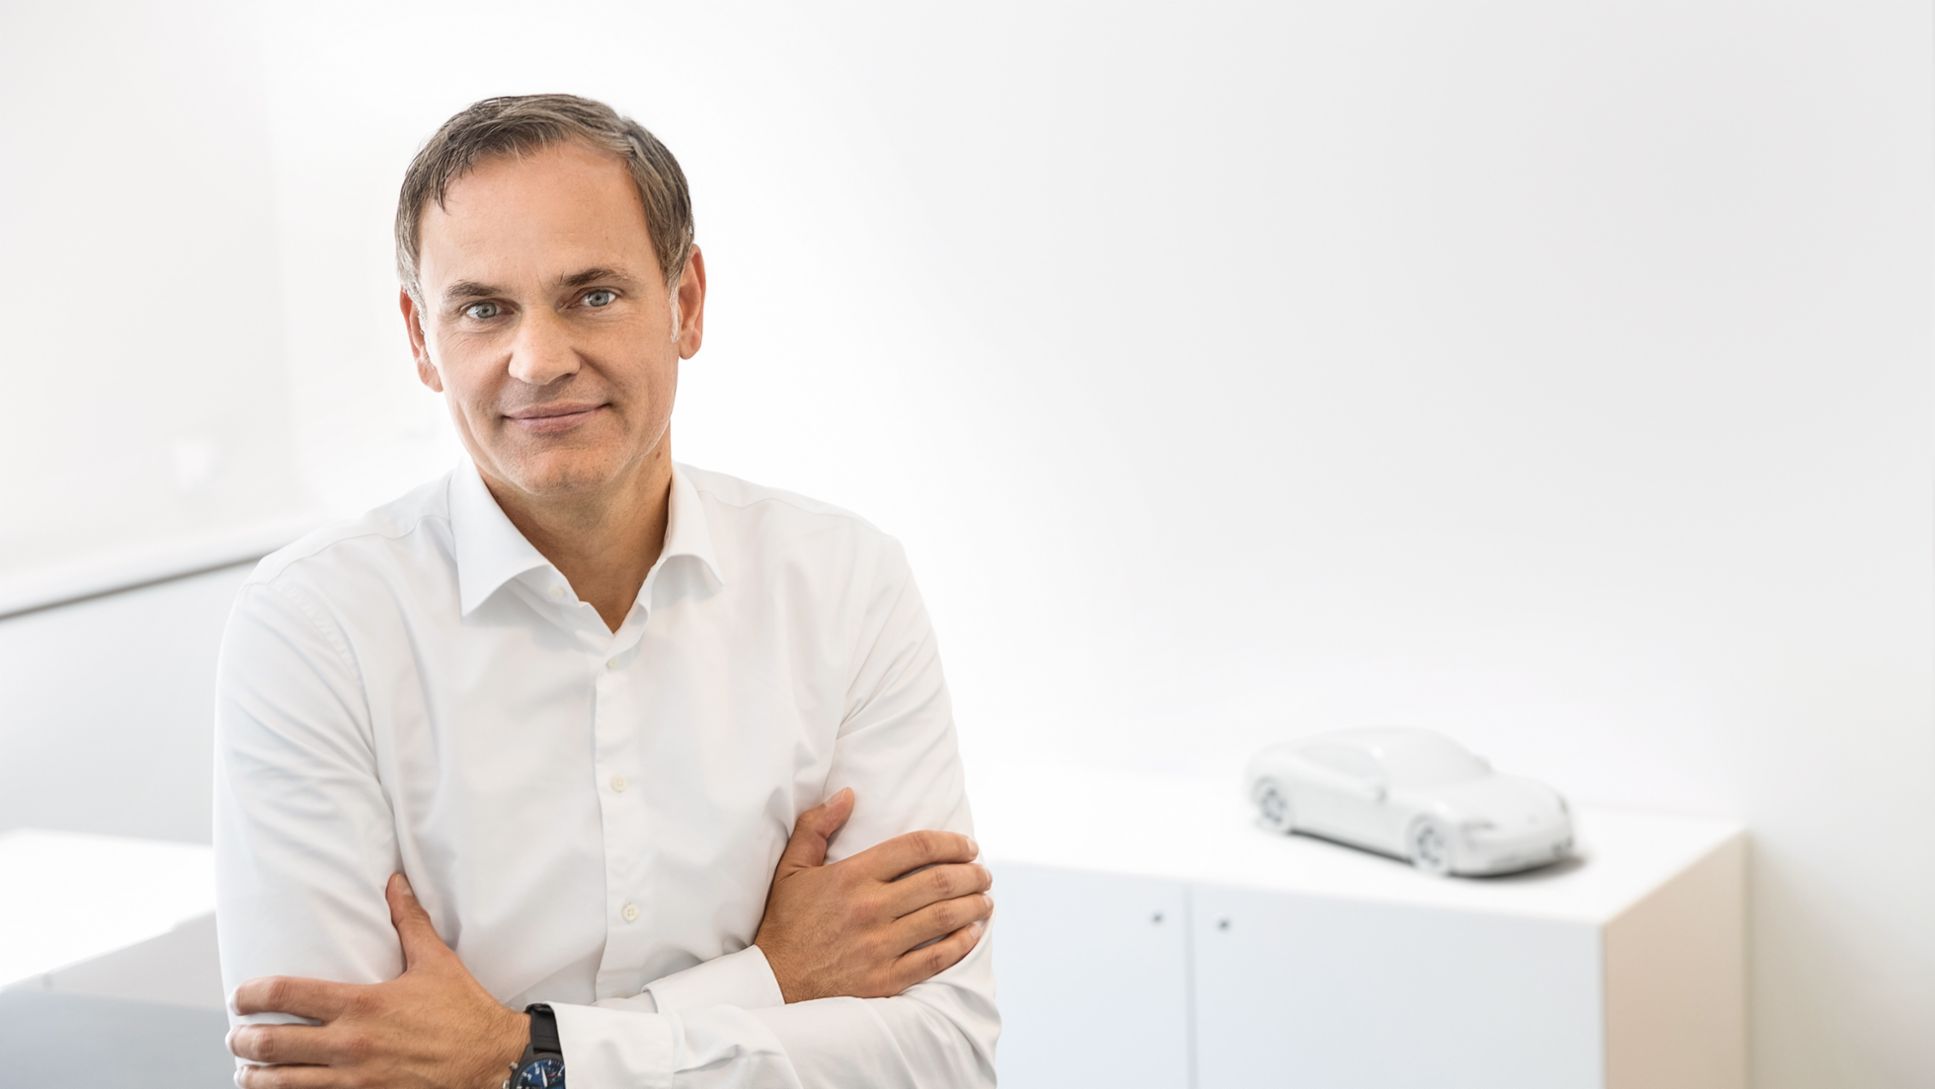 Oliver Blume, Chairman of the Executive Board of Dr. Ing. h.c. F. Porsche AG, 2019, Porsche AG